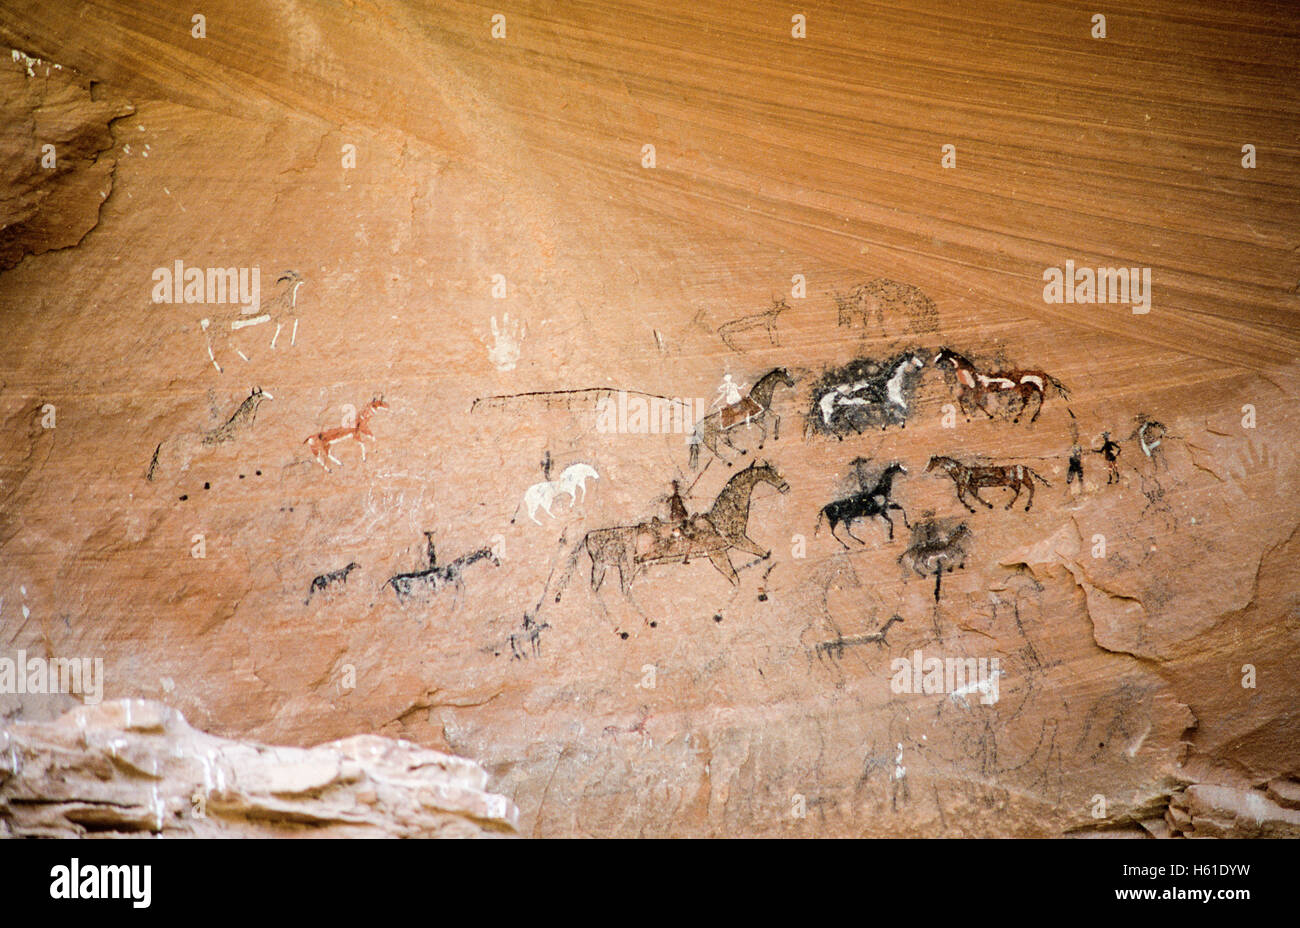 Navajo artist depicted a Ute raid into Navajo country in 1858 on panel in Canyon del Muerto, which is a section of Canyon de Che Stock Photo